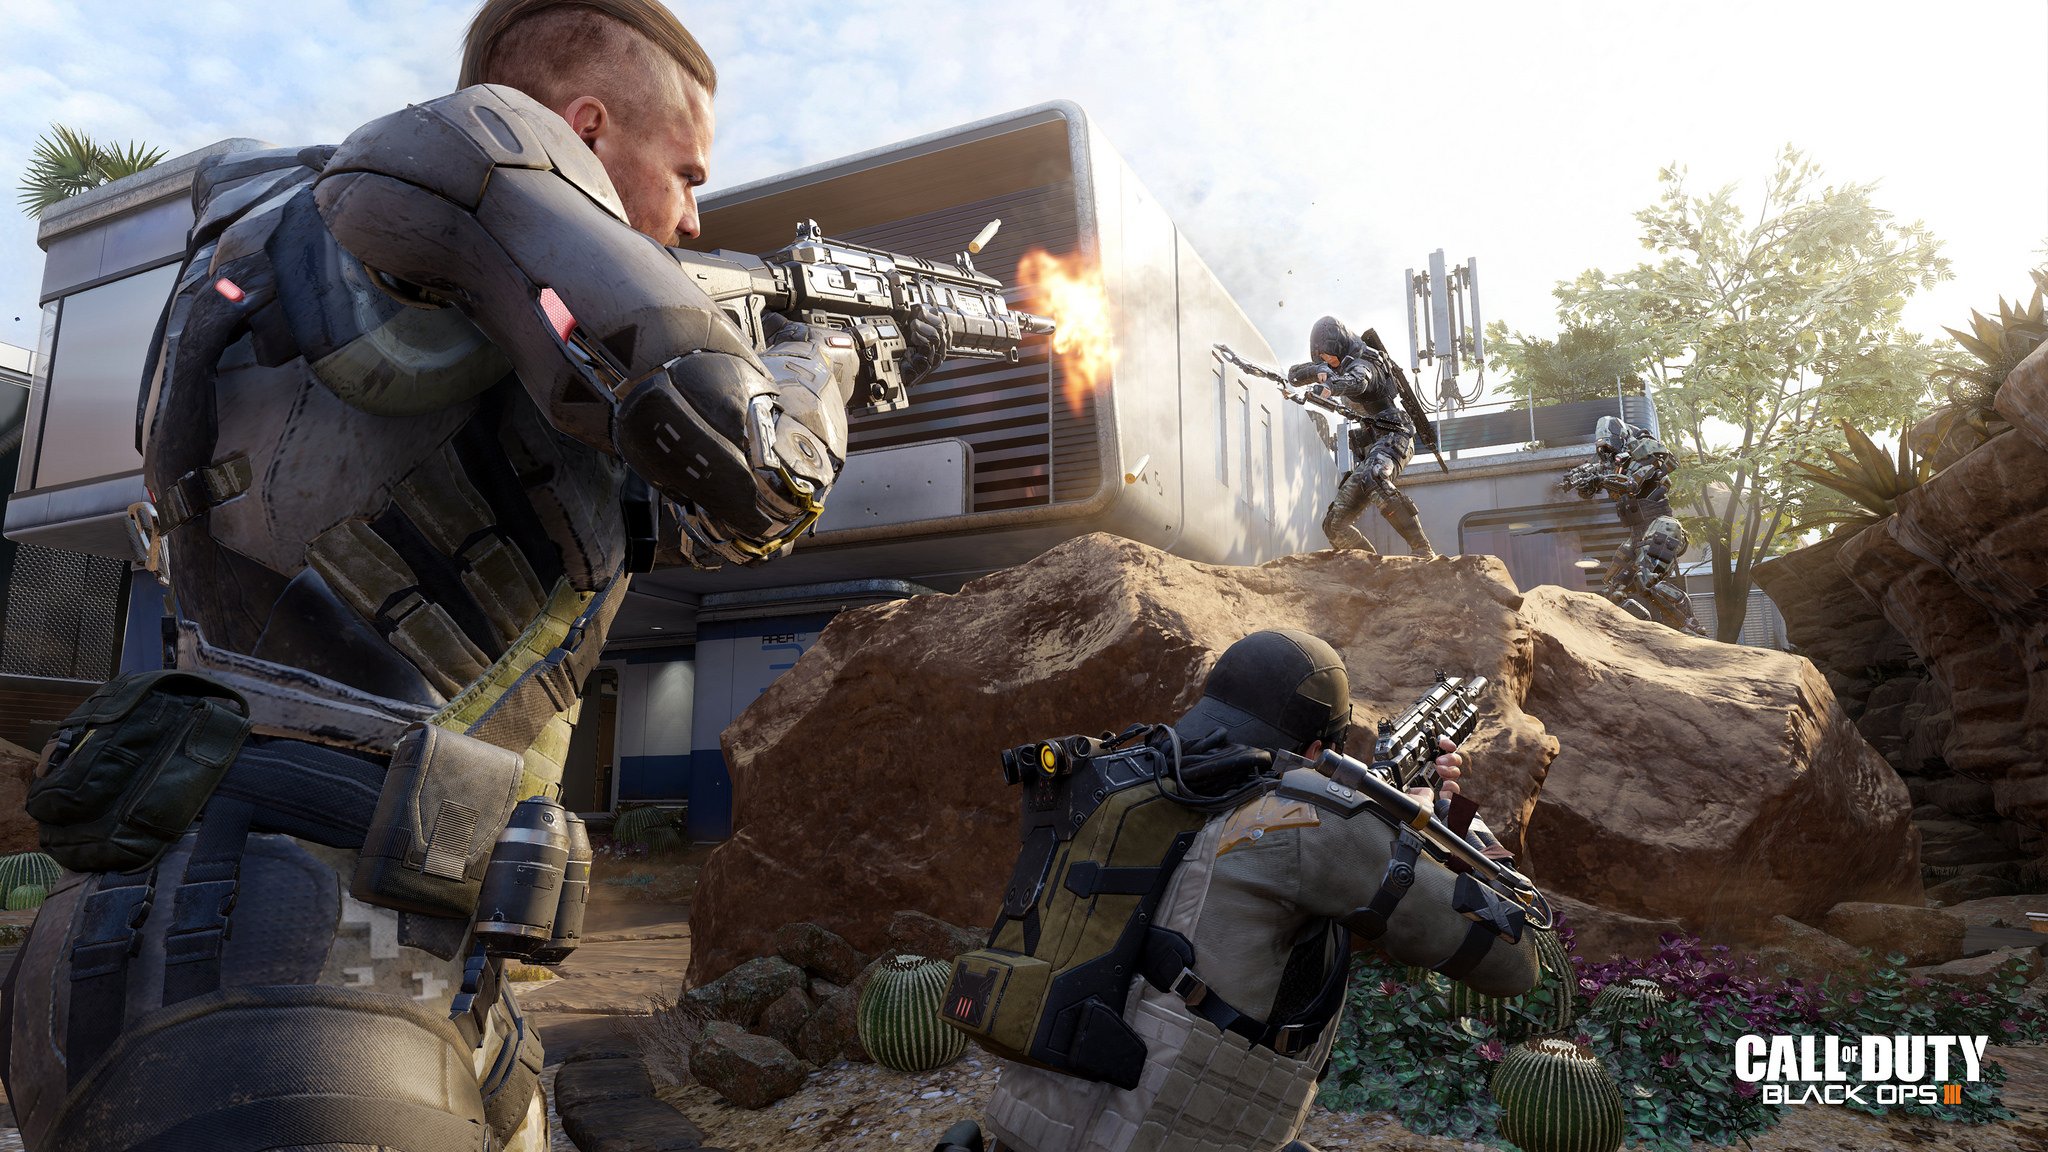 Here's what's changed from the Call of Duty: Black Ops 3 beta to the release.